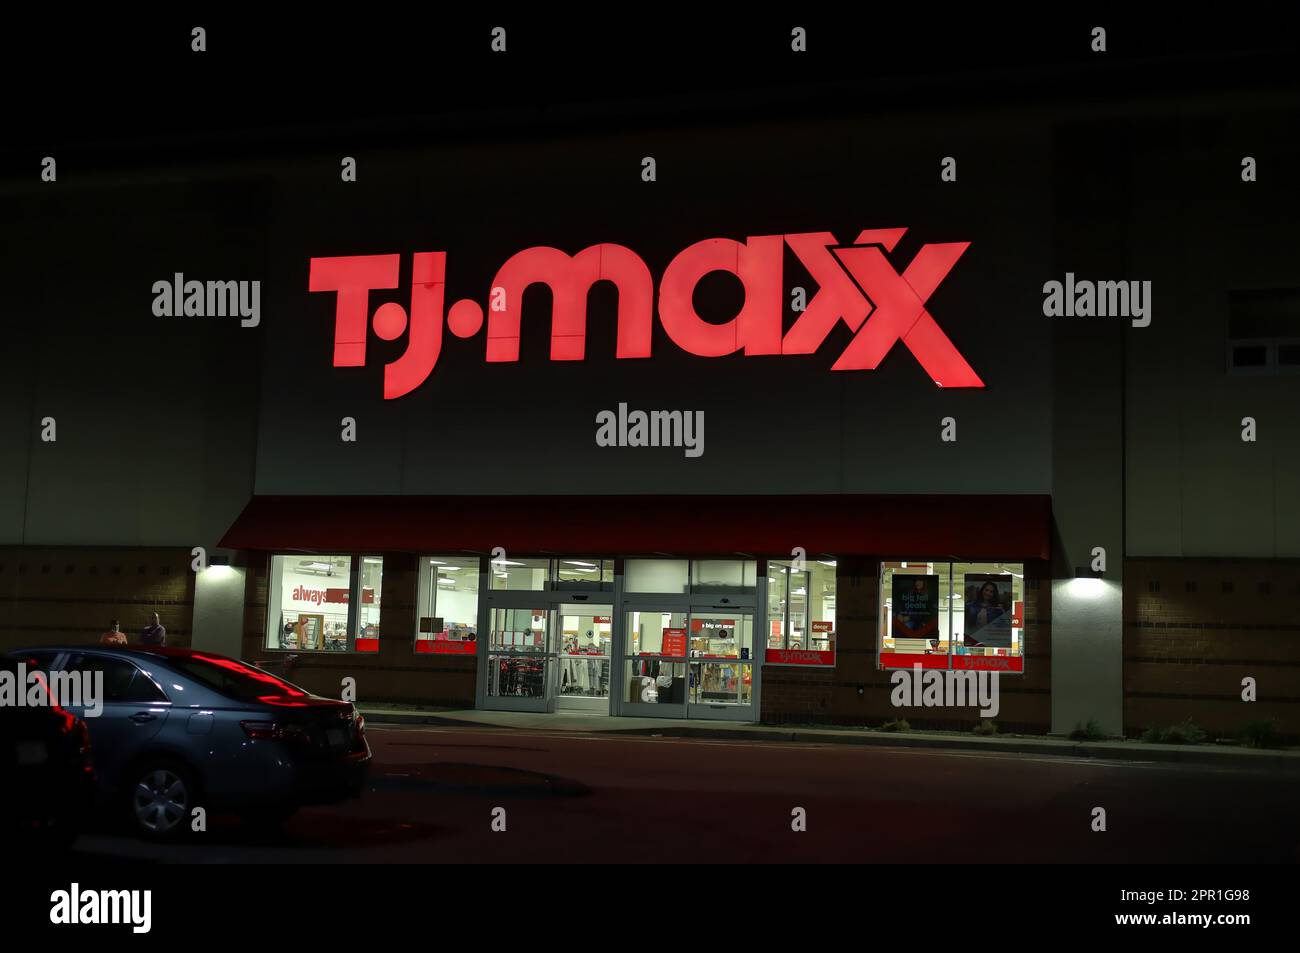 Tj maxx usa hi-res stock photography and images - Alamy